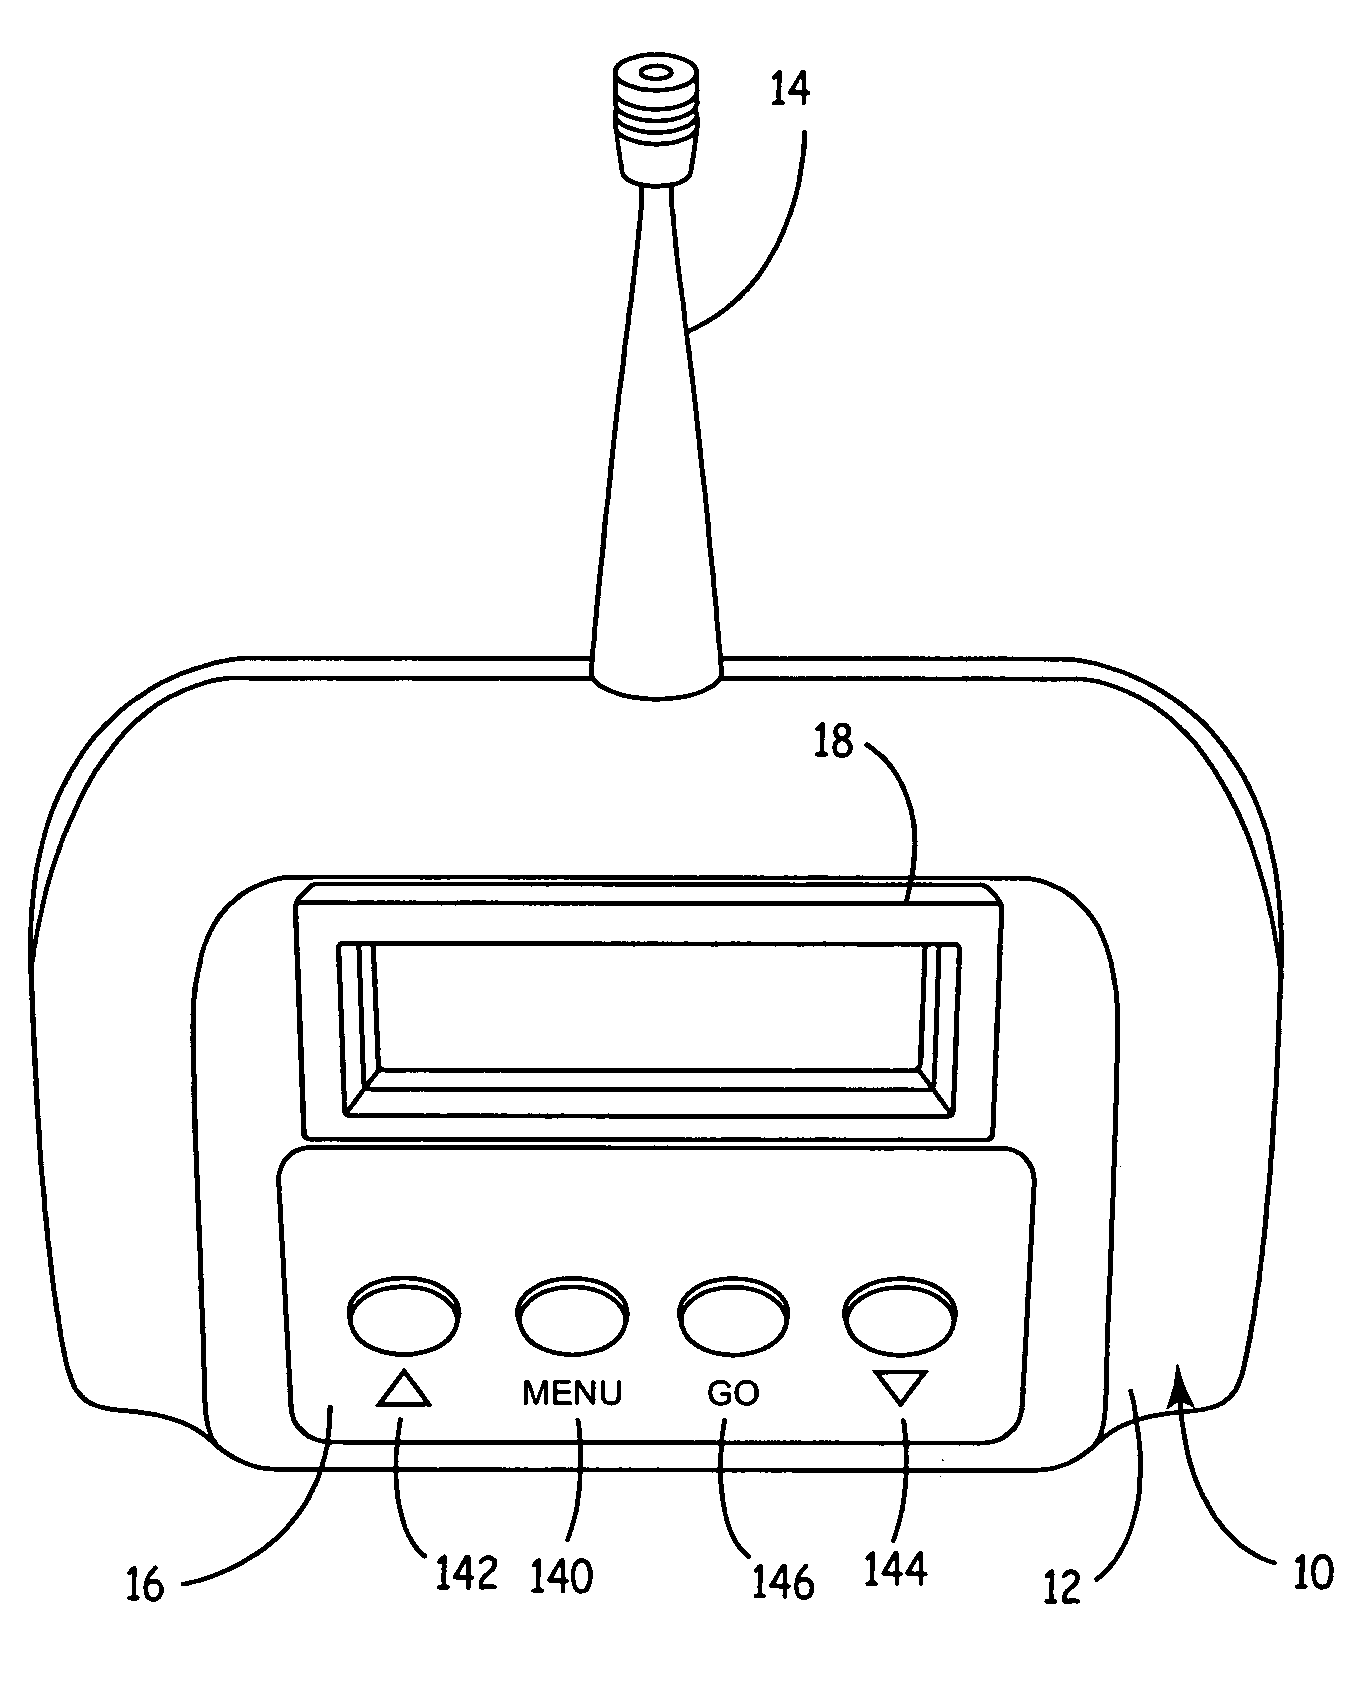 Method and apparatus for collecting and displaying consumption data from a meter reading system